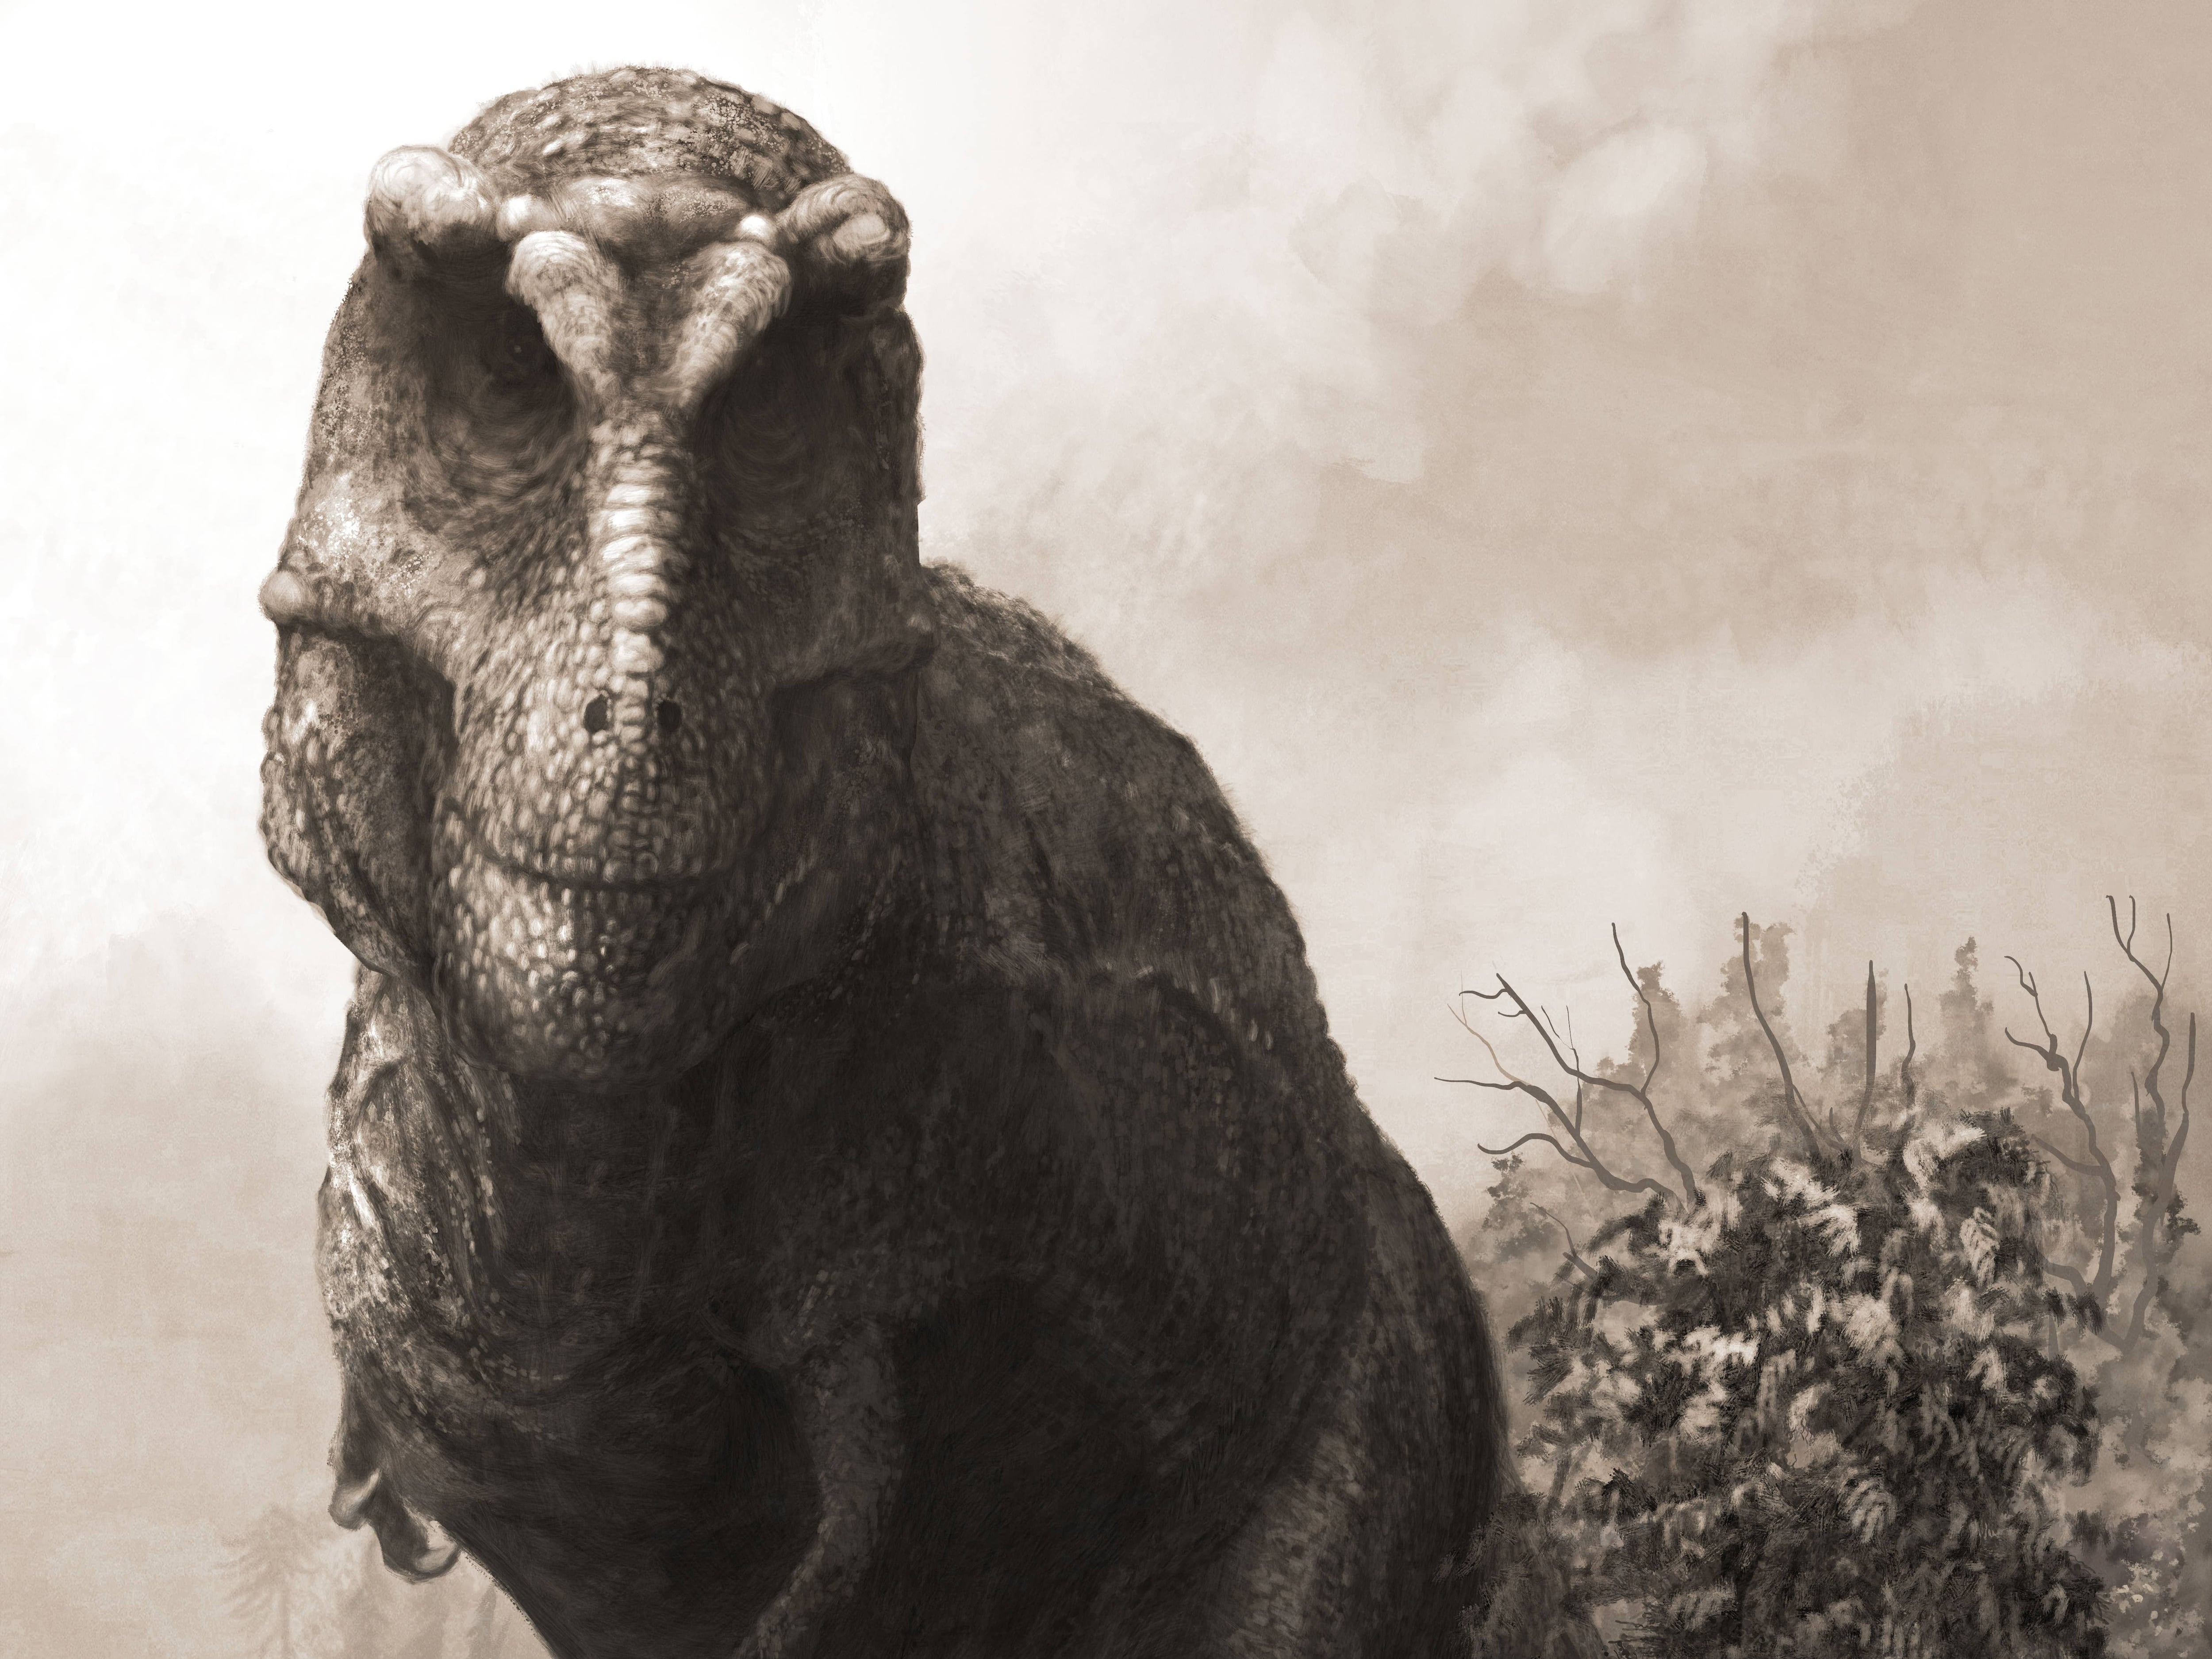 T. rex may have been much heavier and longer than previously thought – study